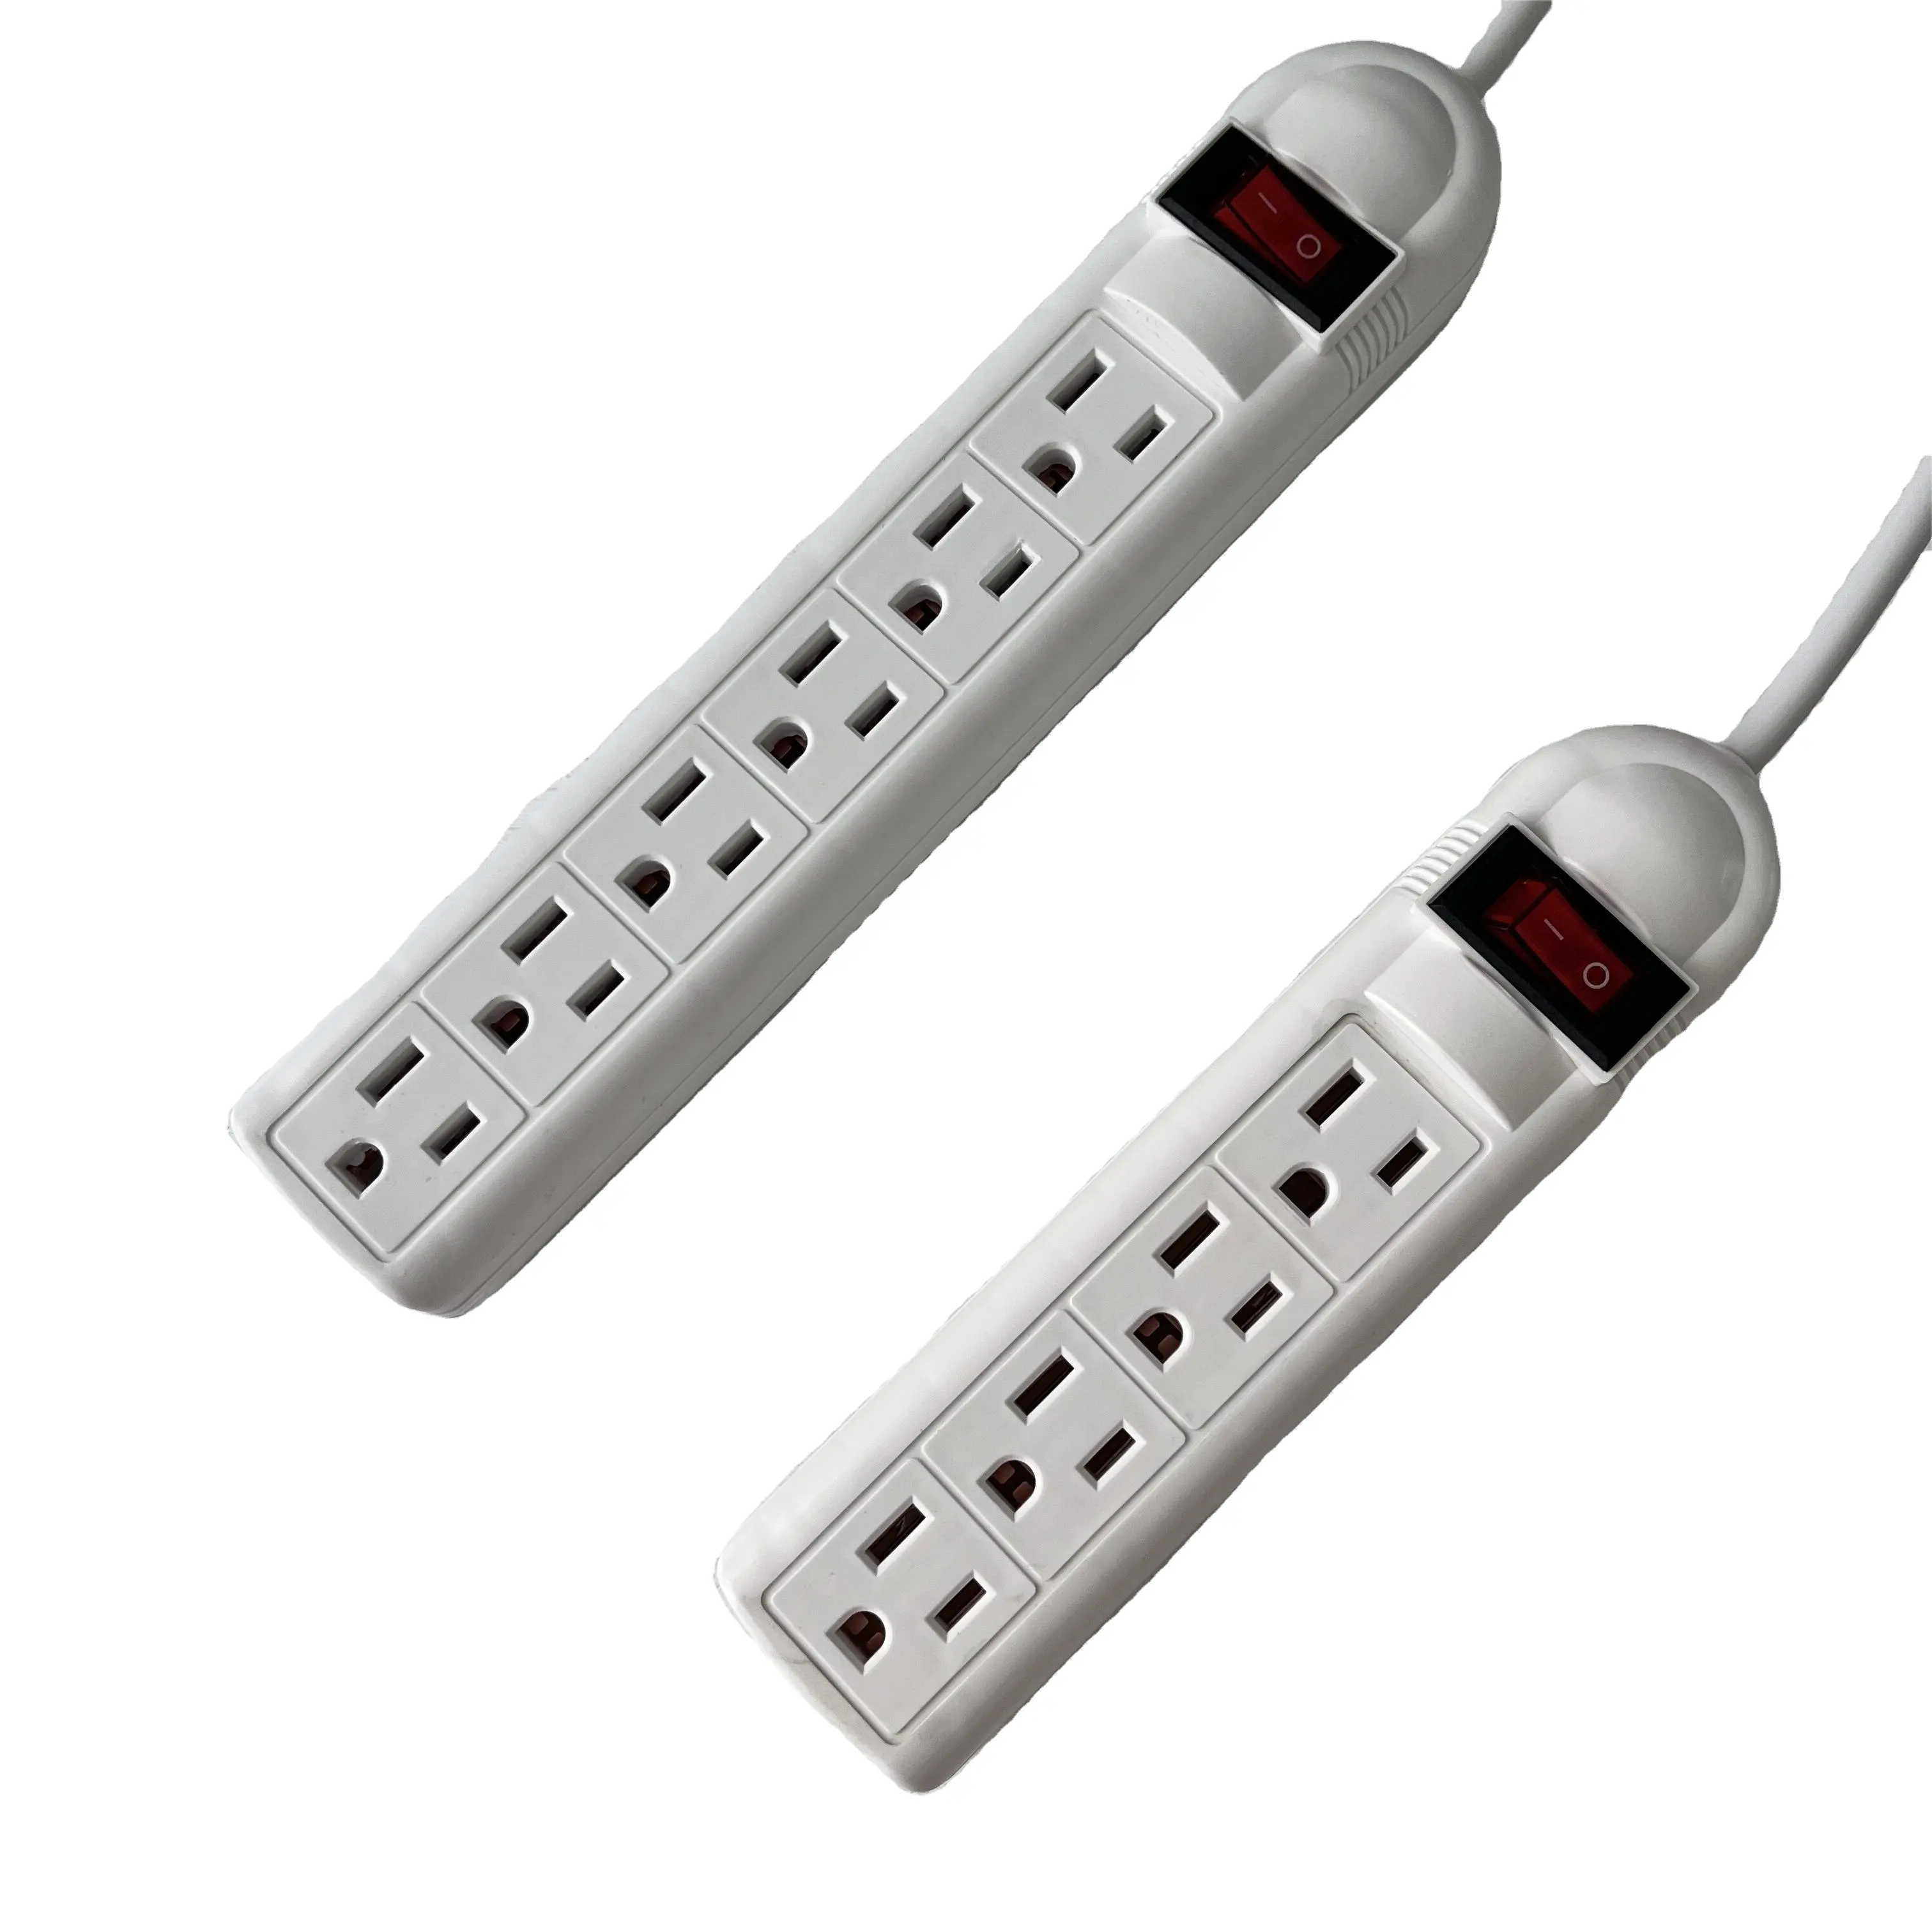 us 14/16/18 awg 14/3 plugs electric surge protector extension socket